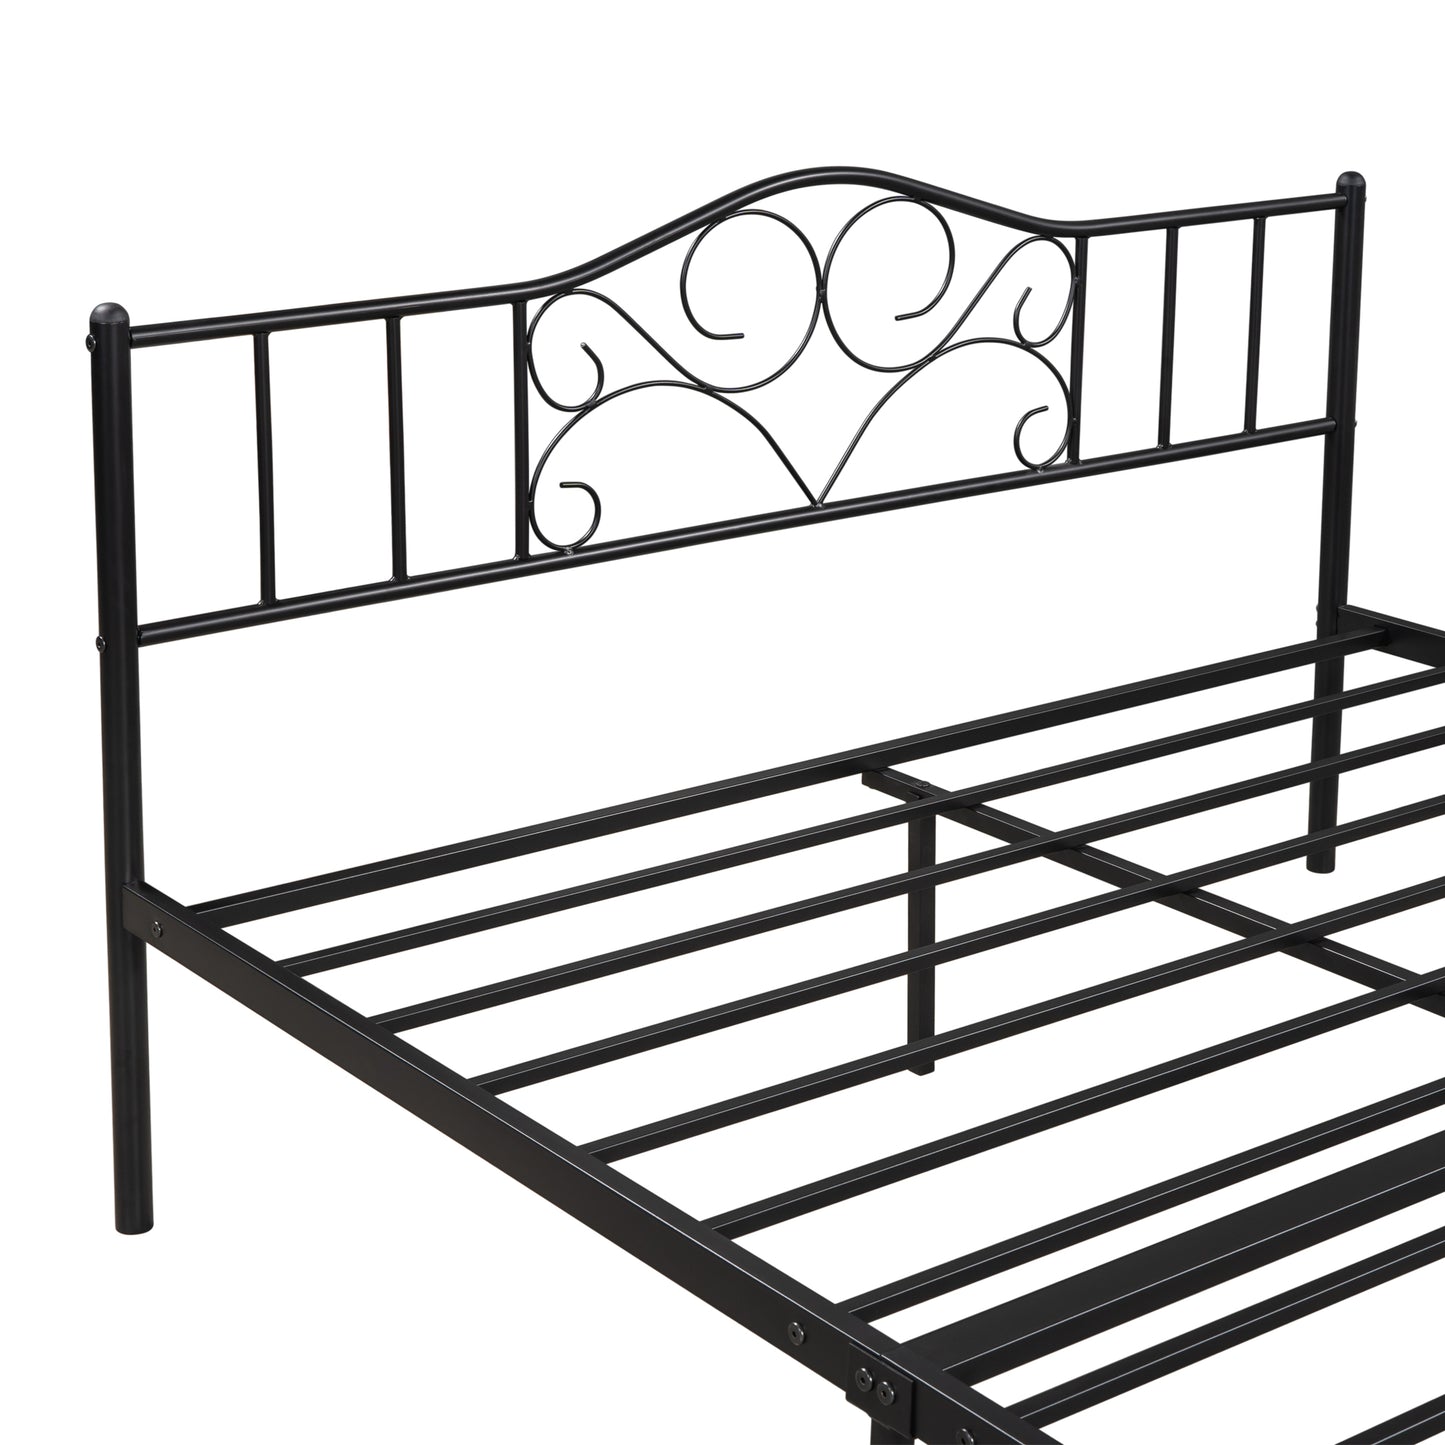 SYNGAR Queen Size Bed Frame, Modern Metal Platform Bed Frame Queen Size with Headboard and 500lb Weight Capacity, No Box Spring Needed